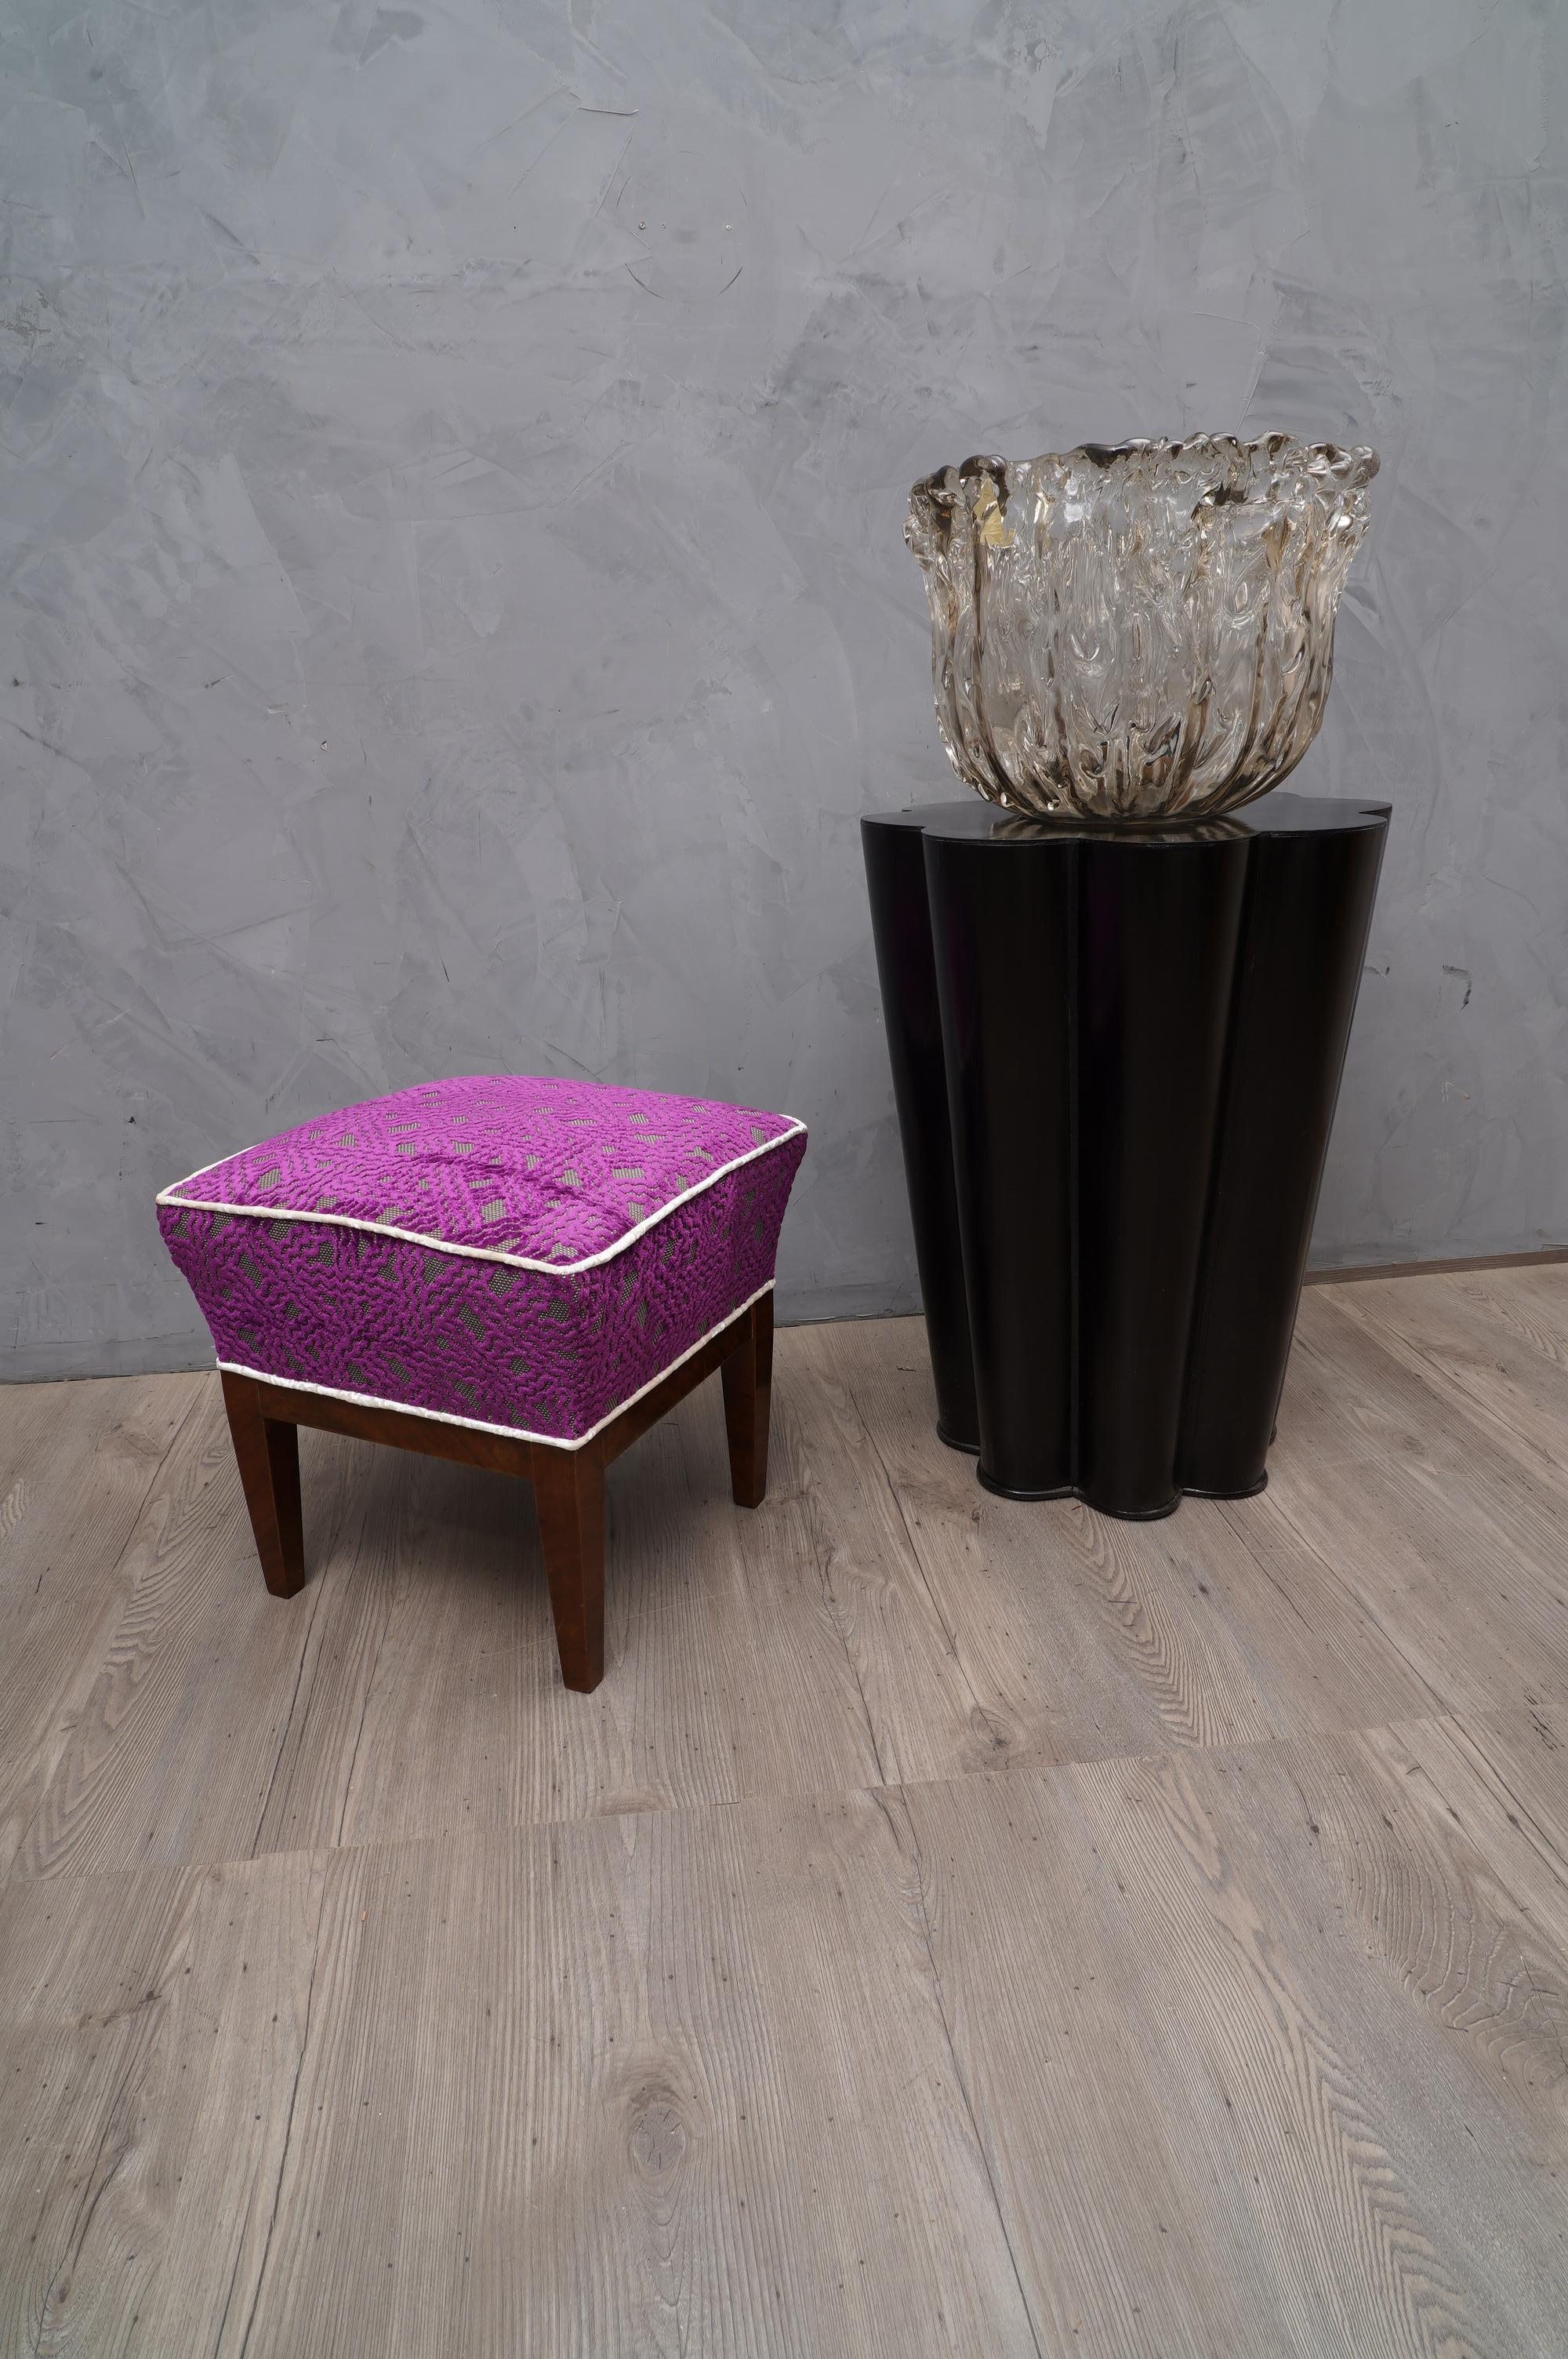 Adorable pouf with very simple shape embellished with a beautiful purple velvet fabric with geometric designs.

The structure of the pouf is in polished walnut wood with shellac; very beautiful and simple its design with four spiked legs. Above the